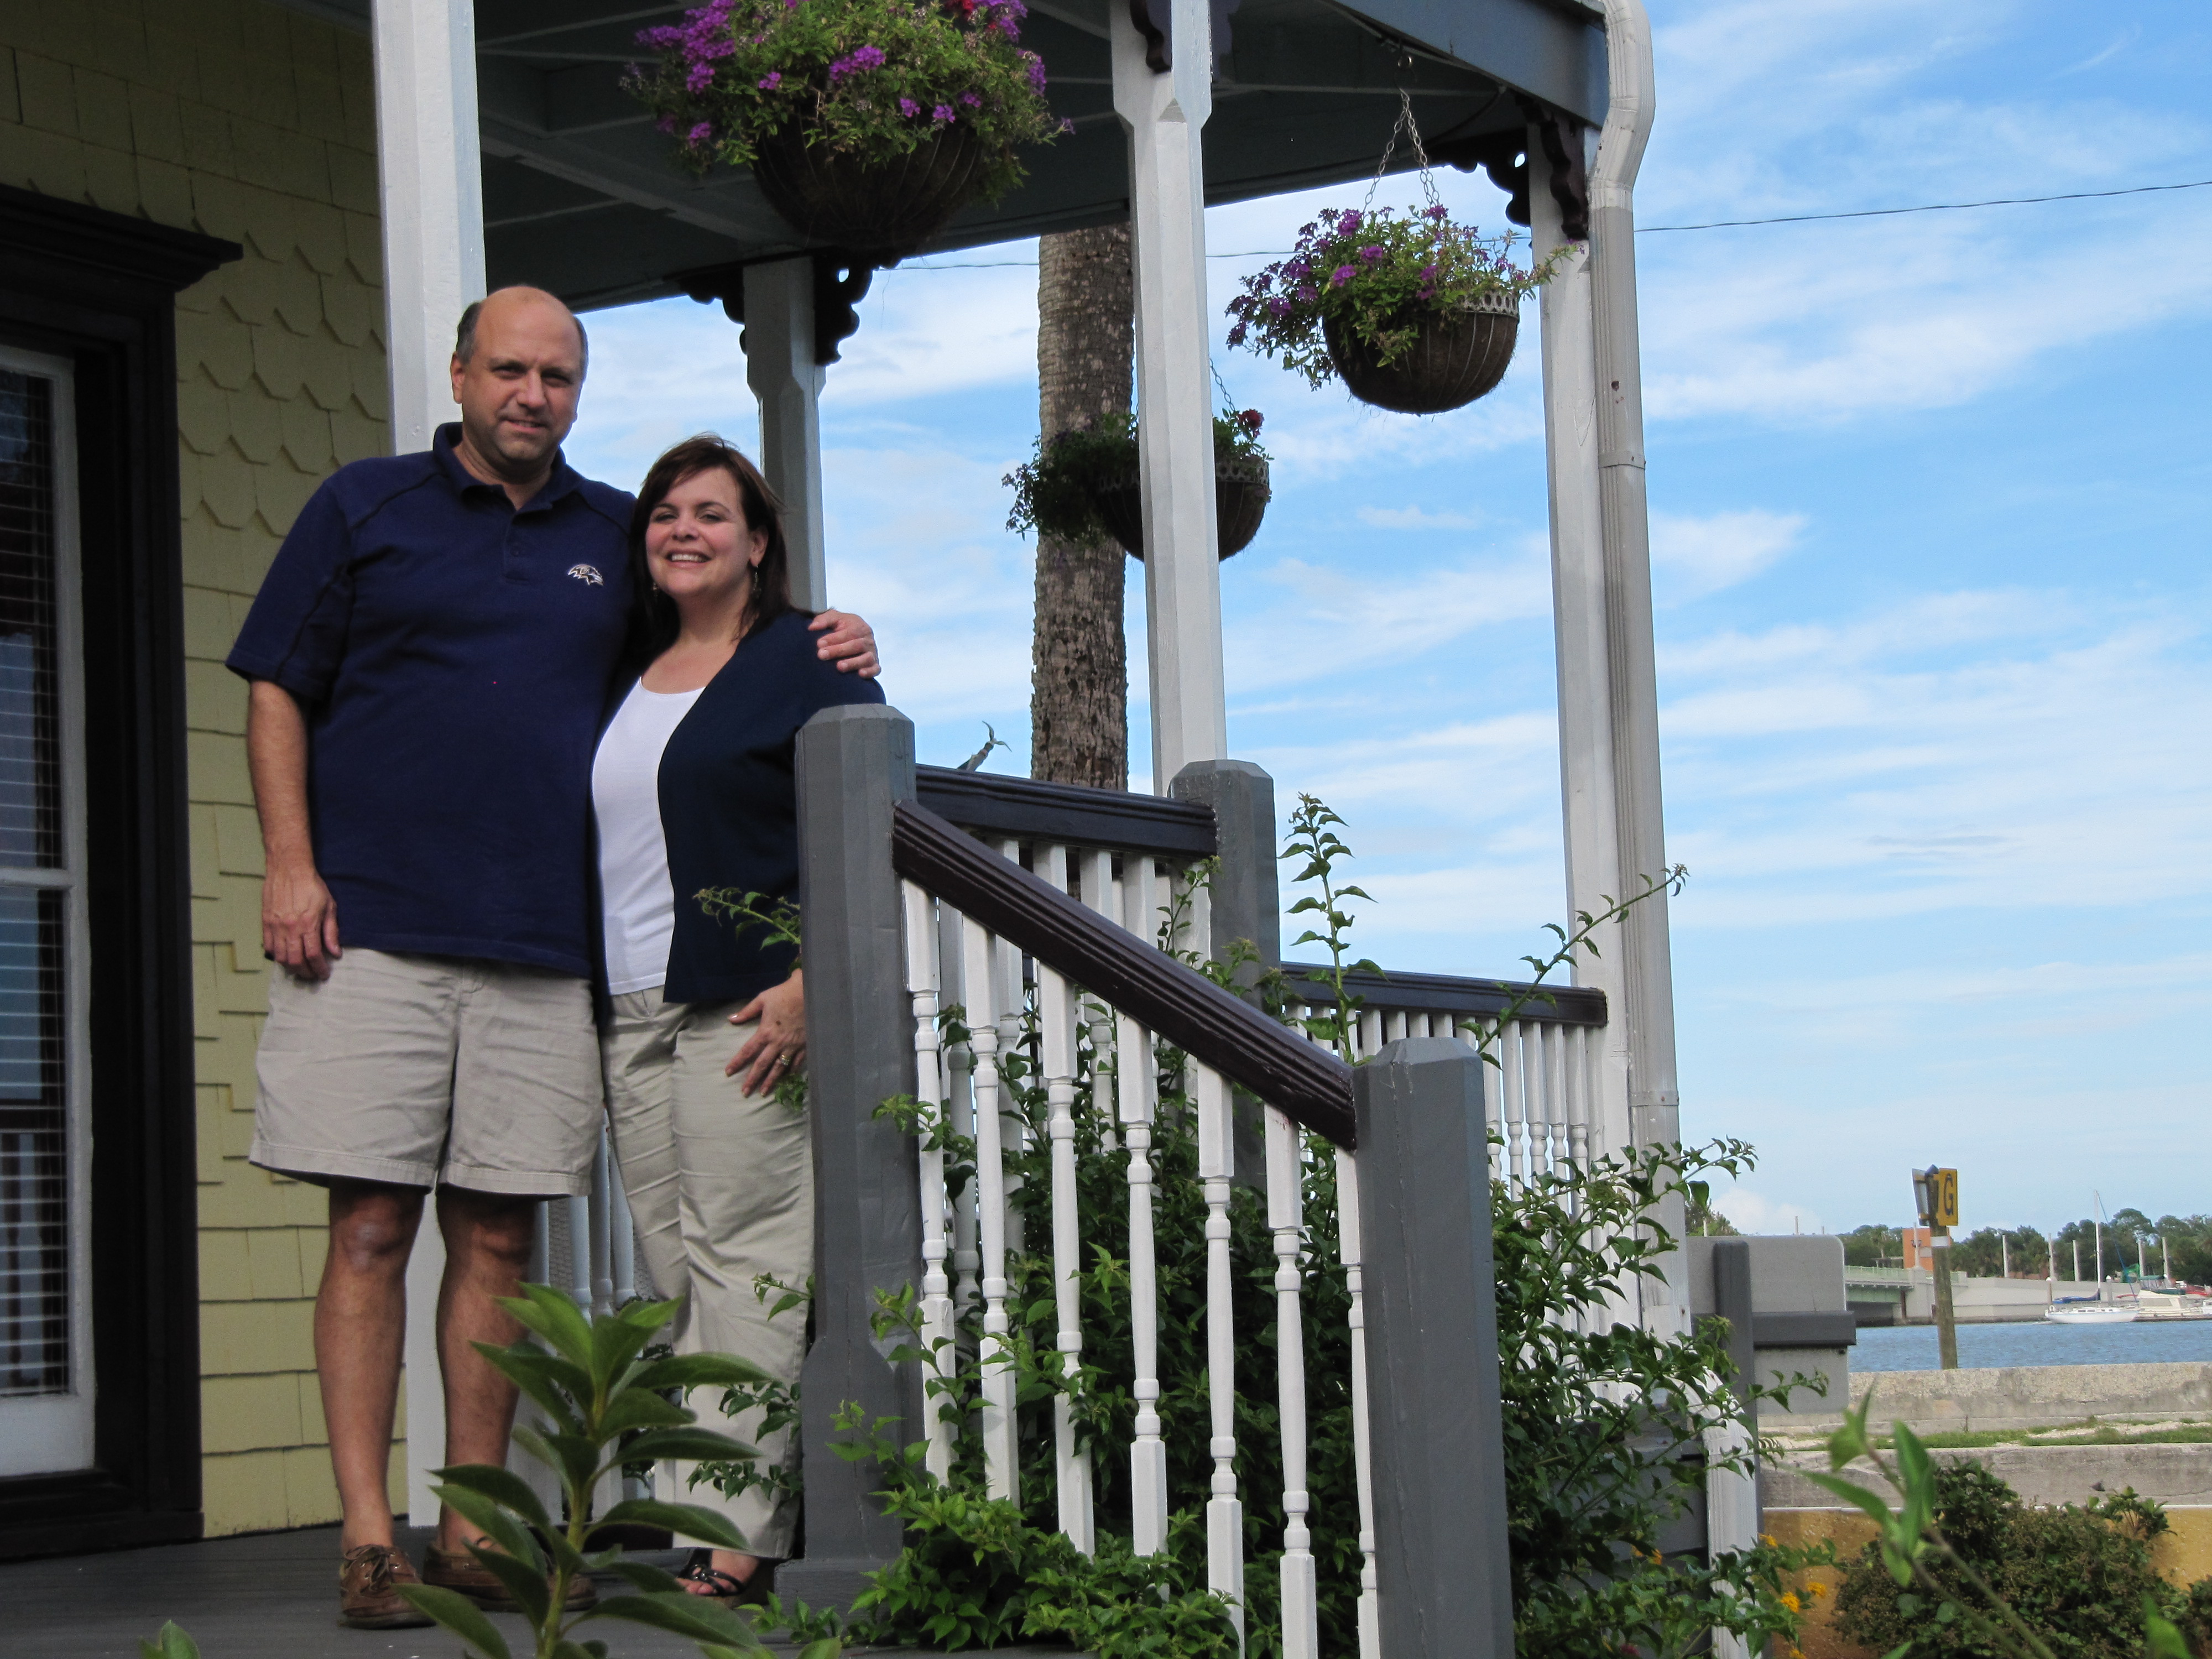 Bed and breakfast owners Mike and Sandy Wieber of St. Augustine, FL, on the front porch of their inn.